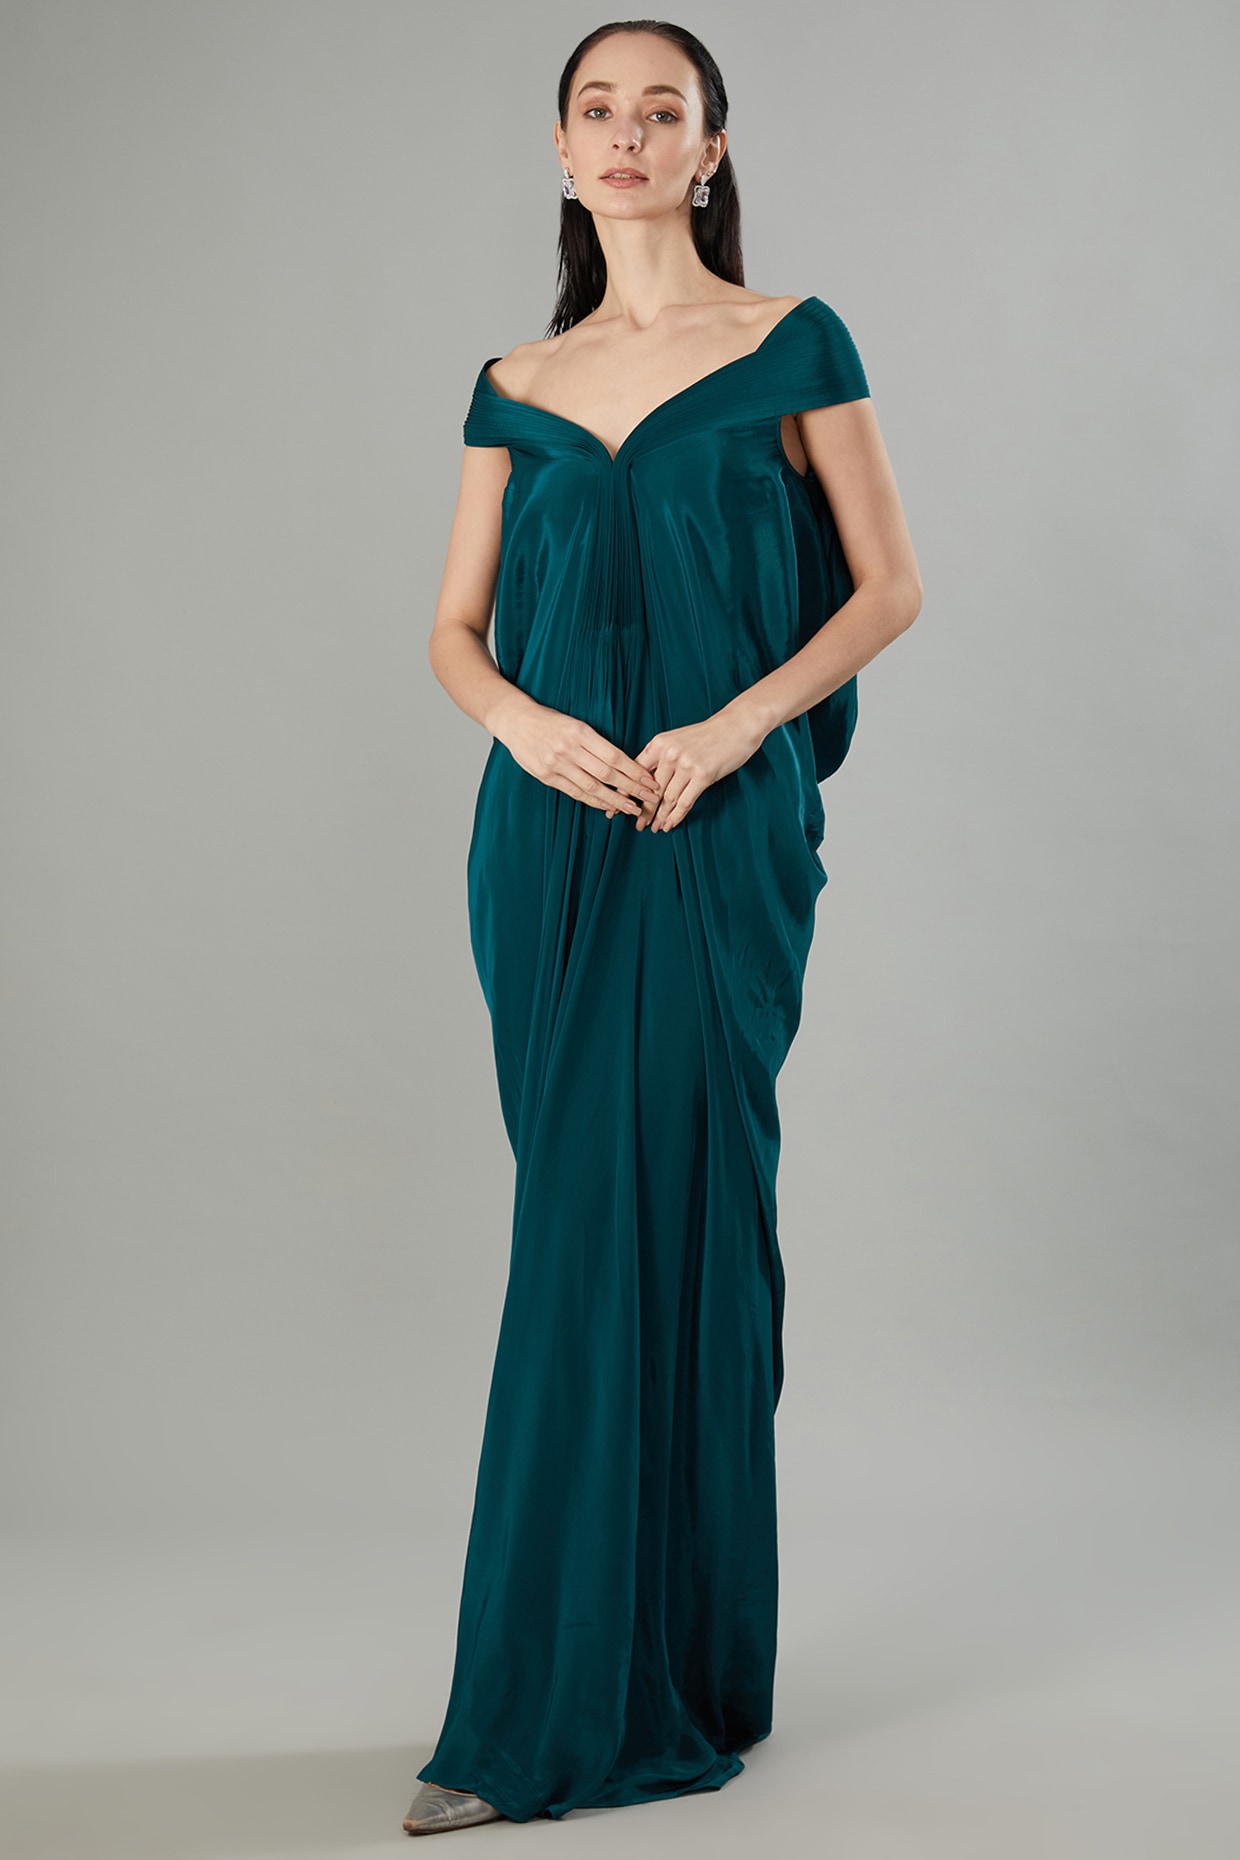 Chiffon Evening Dress In Beijing - Prices, Manufacturers & Suppliers